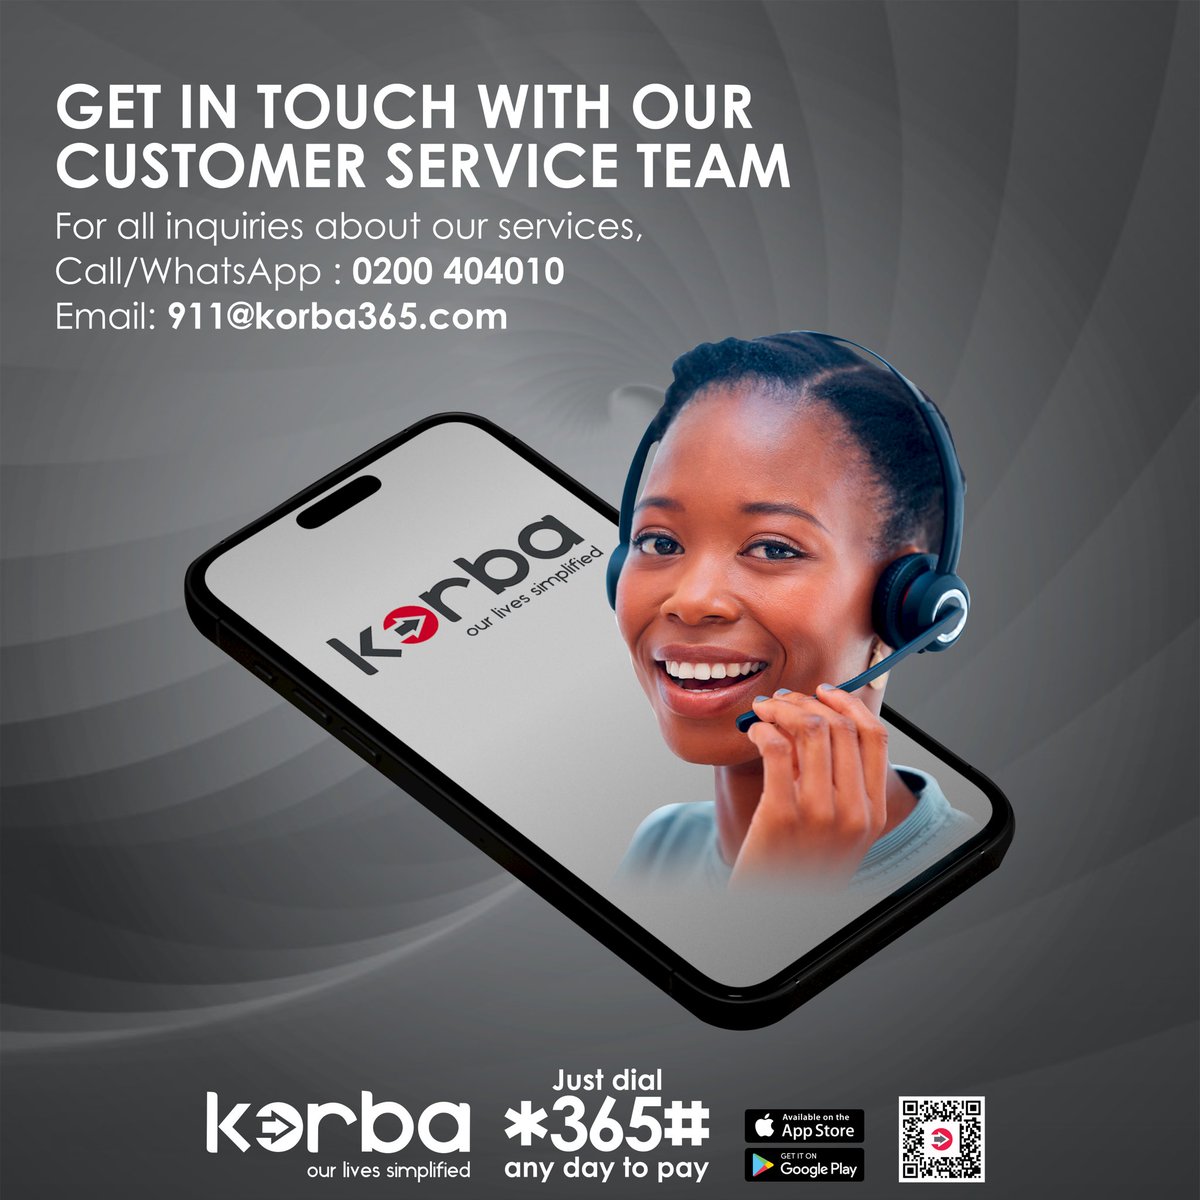 If you ever need any assistance, don’t hesitate to reach out to our amazing customer service team. They’ll respond to your inquiries promptly and assist you in the best way they can. We’re here for you! #customerservice #talktous #Korba365 #Easy #Airdrop #ipltickets